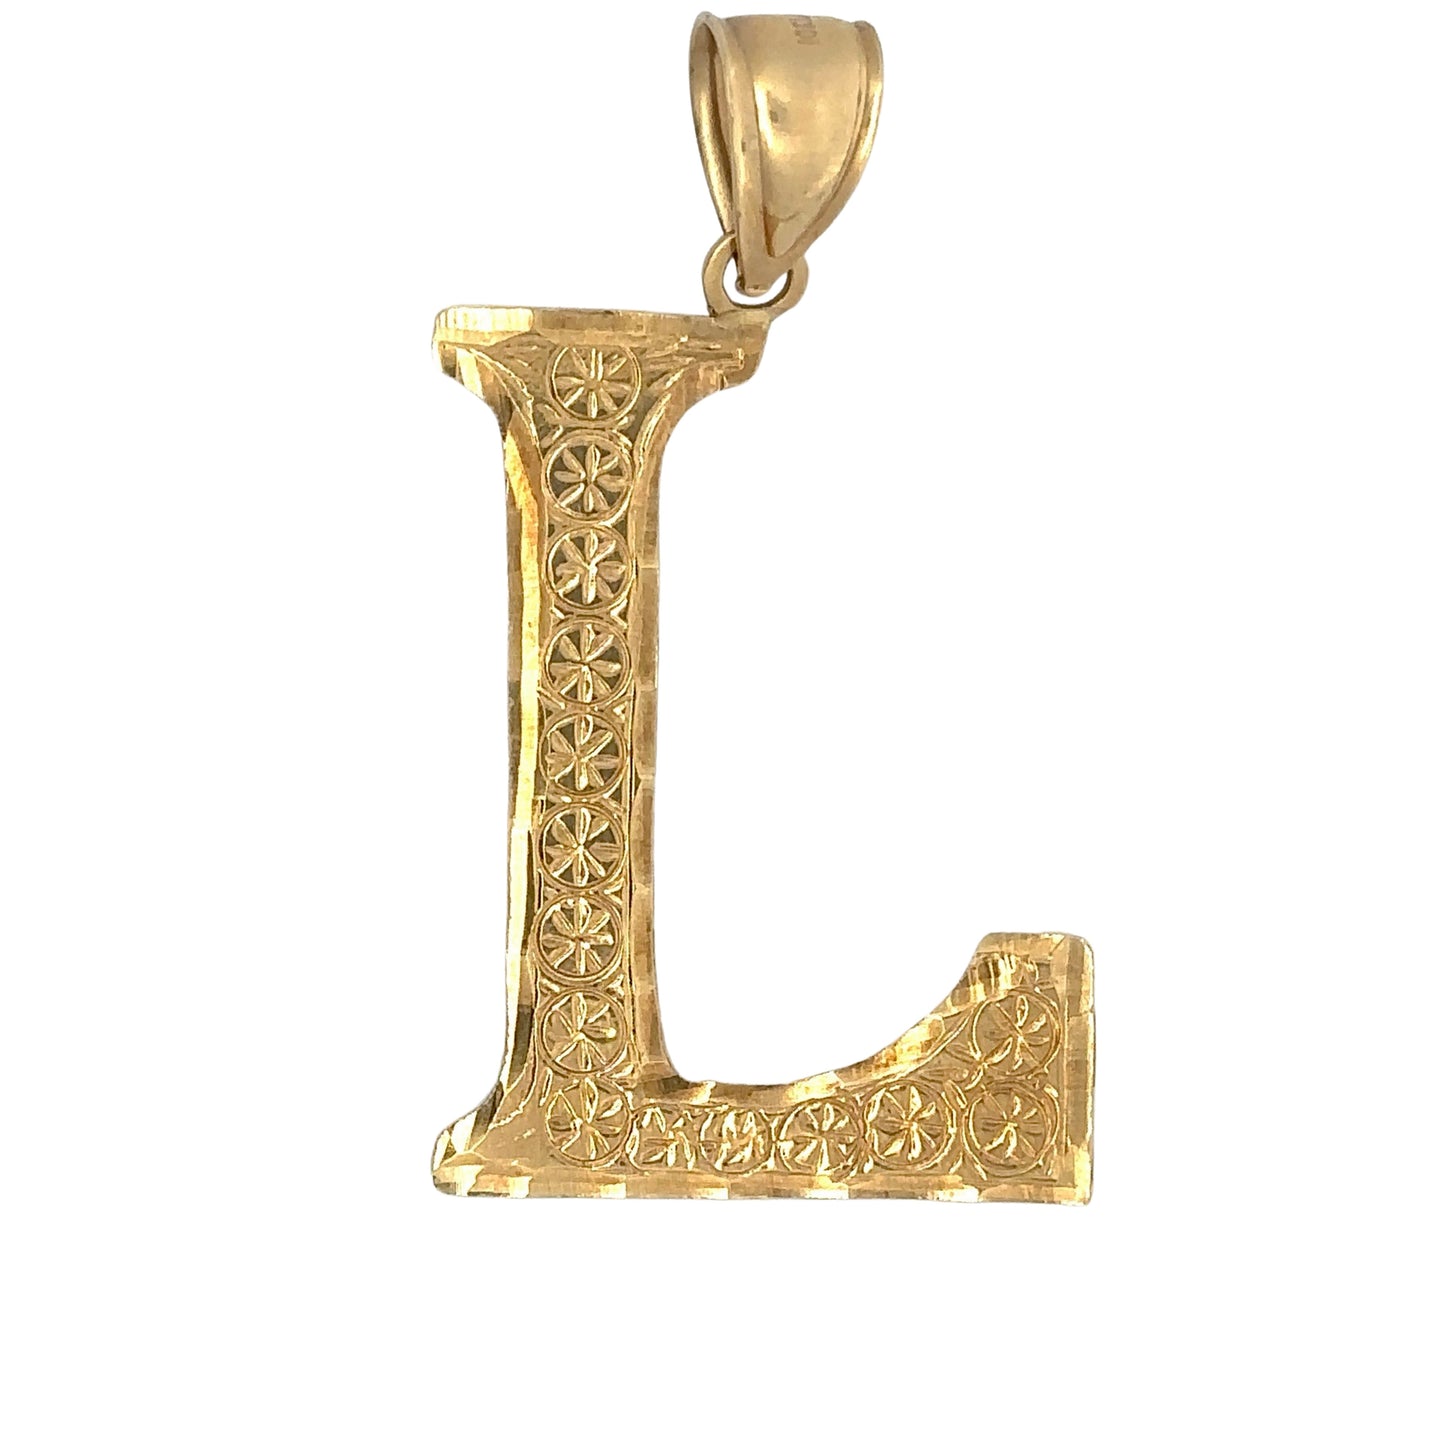 Medium sized L letter pendant in yellow gold with designs